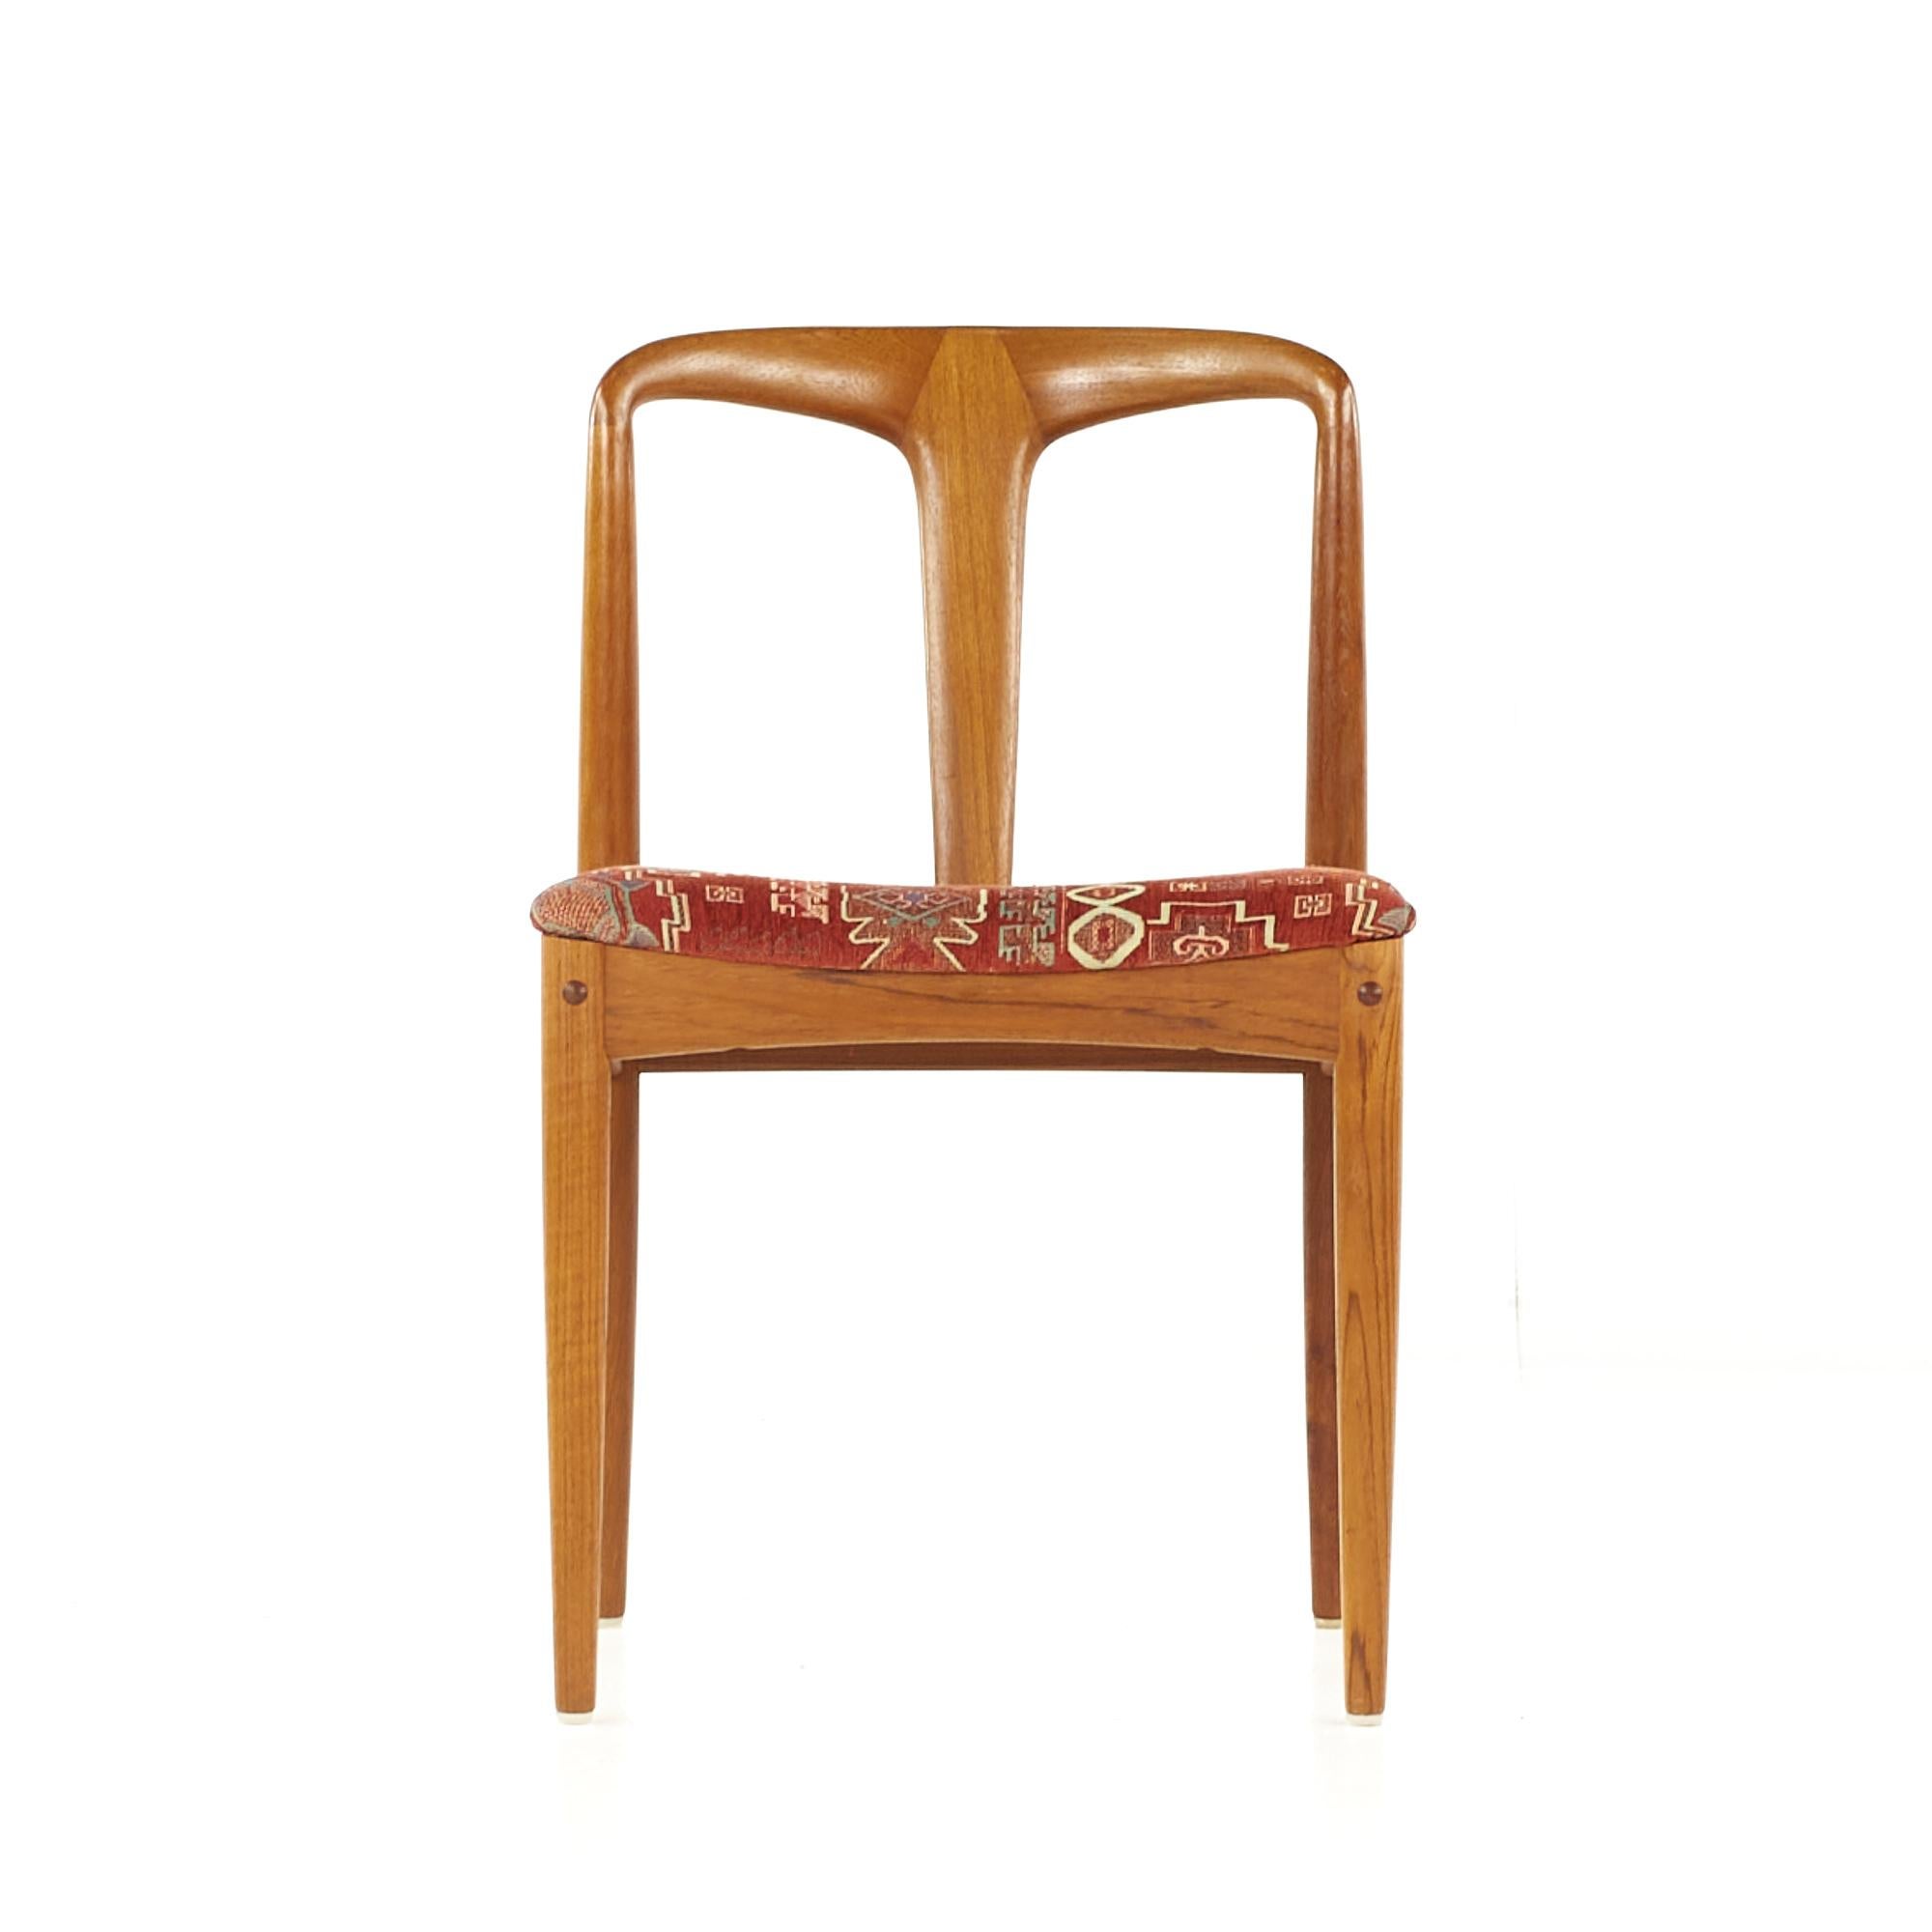 SOLD 03/03/23 Johannes Andersen Mid Century Teak Juliane Dining Chairs, Set of 4 In Good Condition For Sale In Countryside, IL